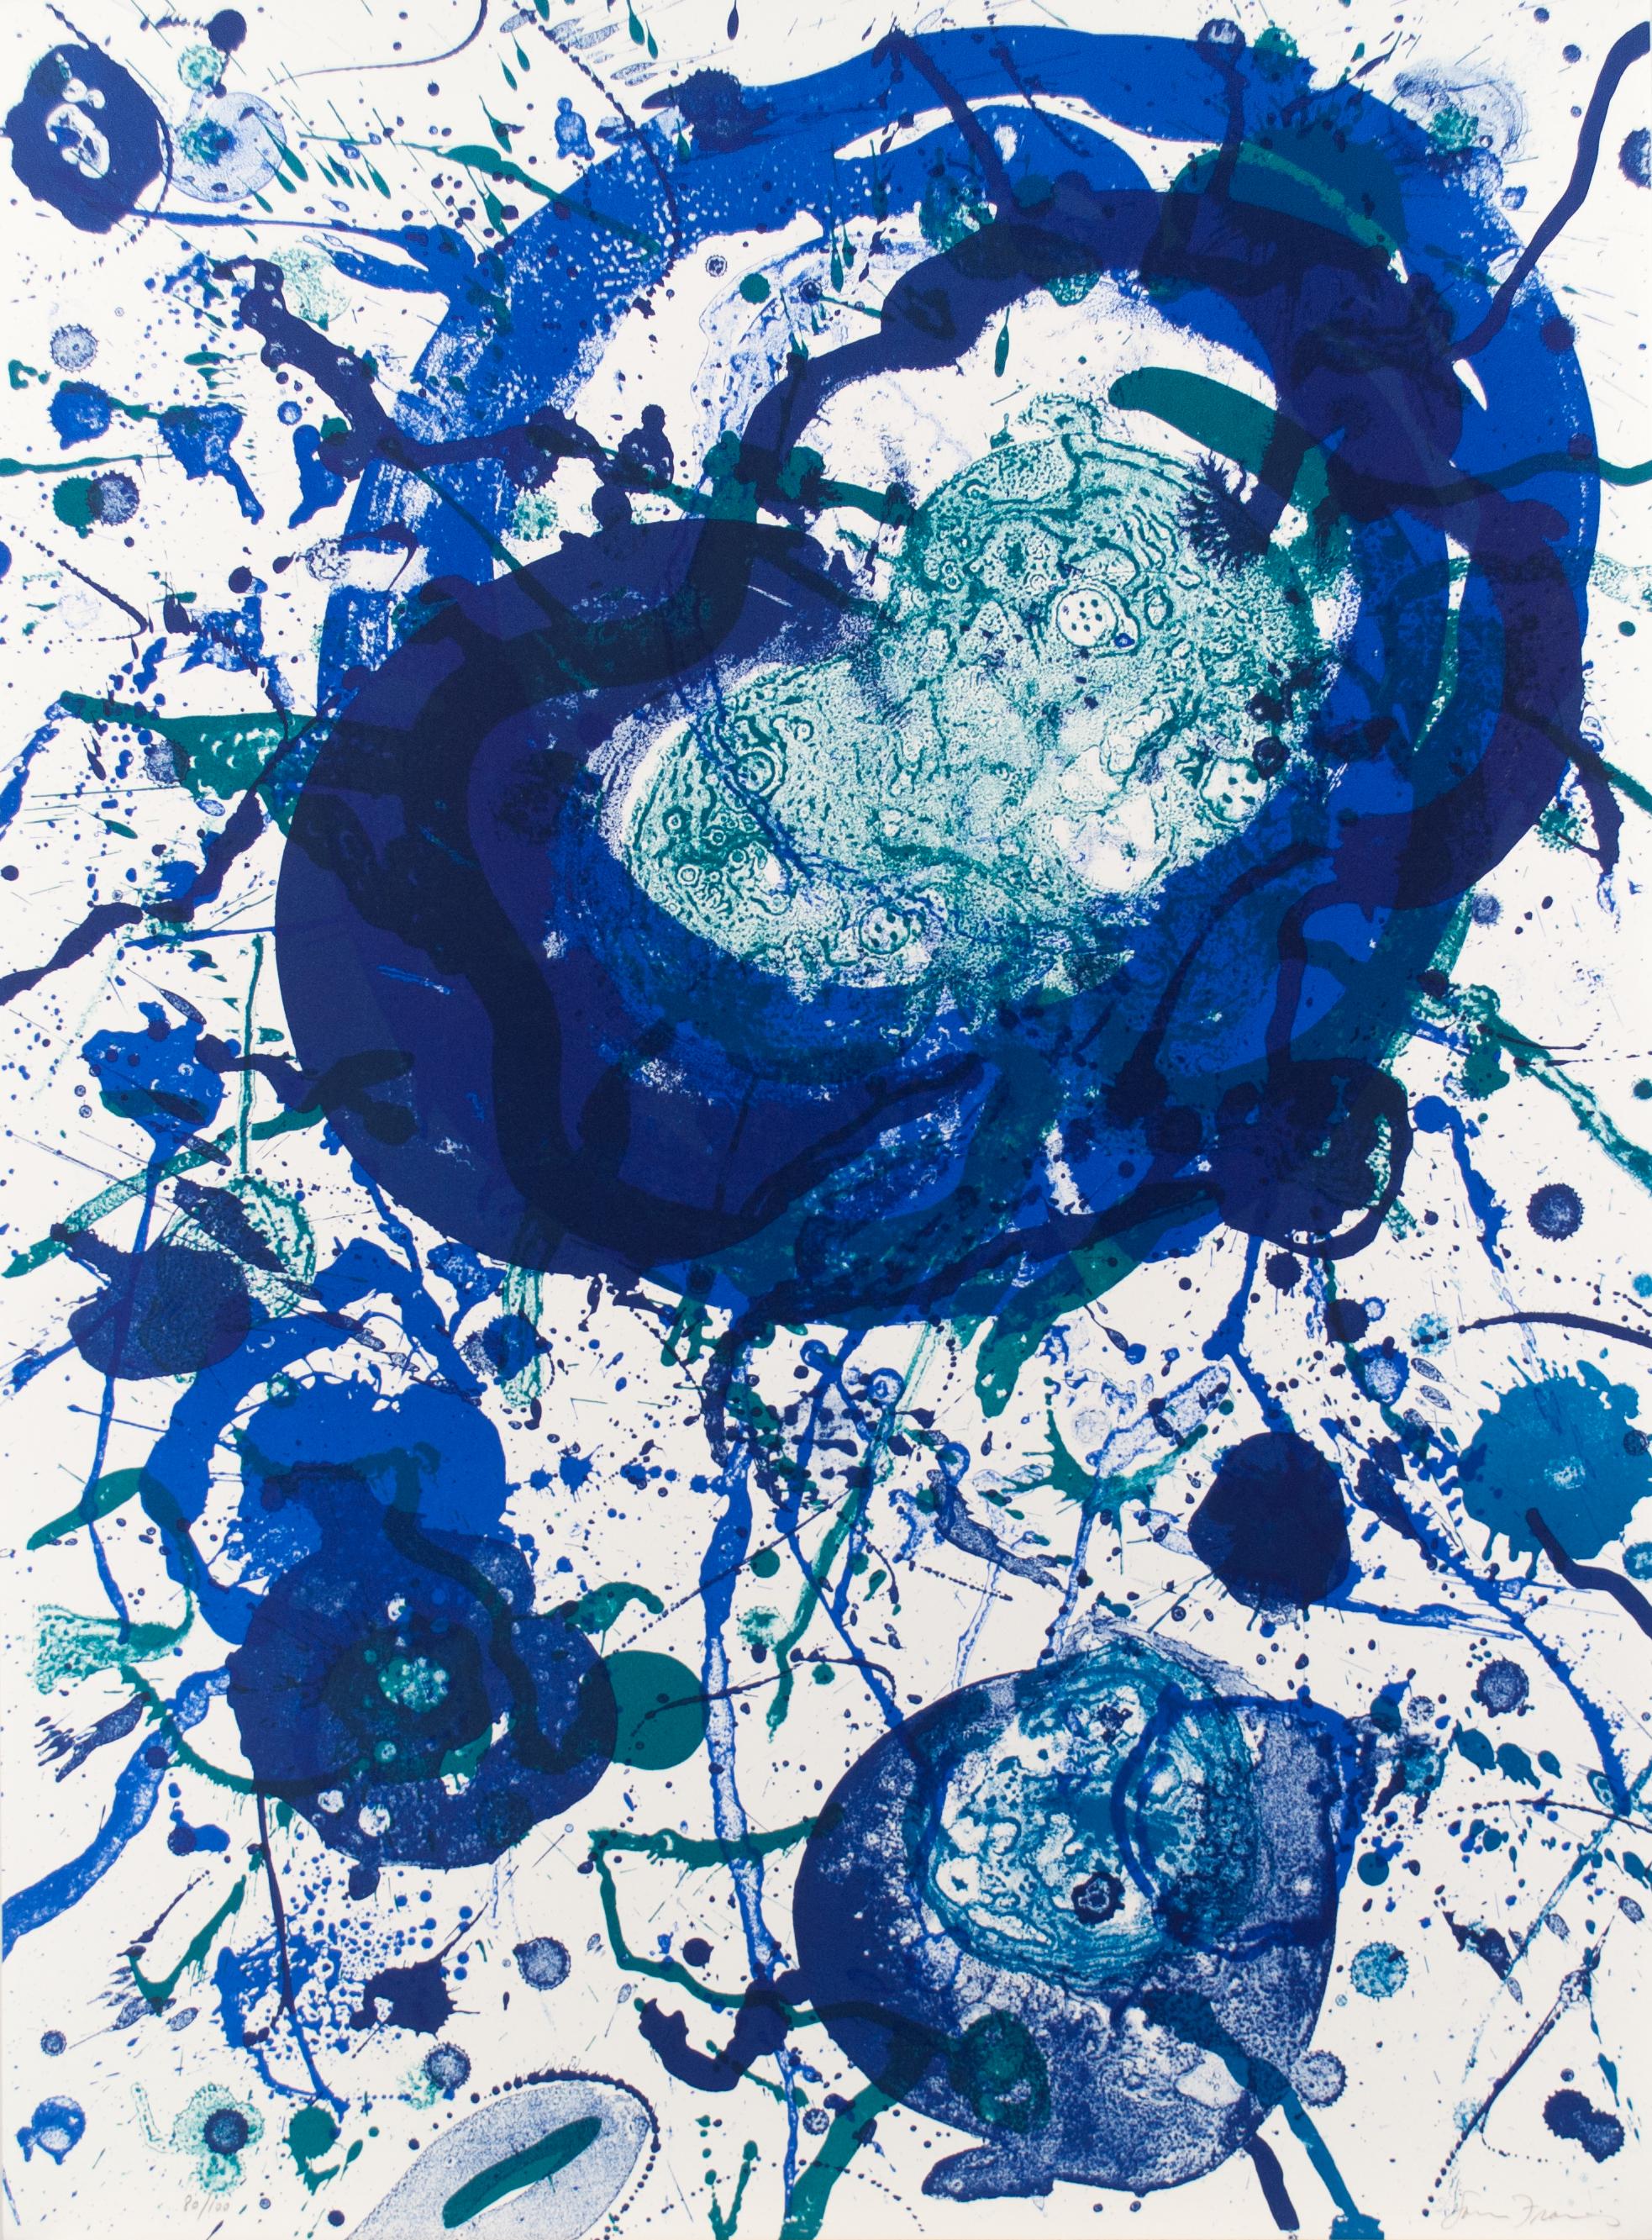 Sam Francis Abstract Print - Untitled from the portfolio “Poems dans le ciel”